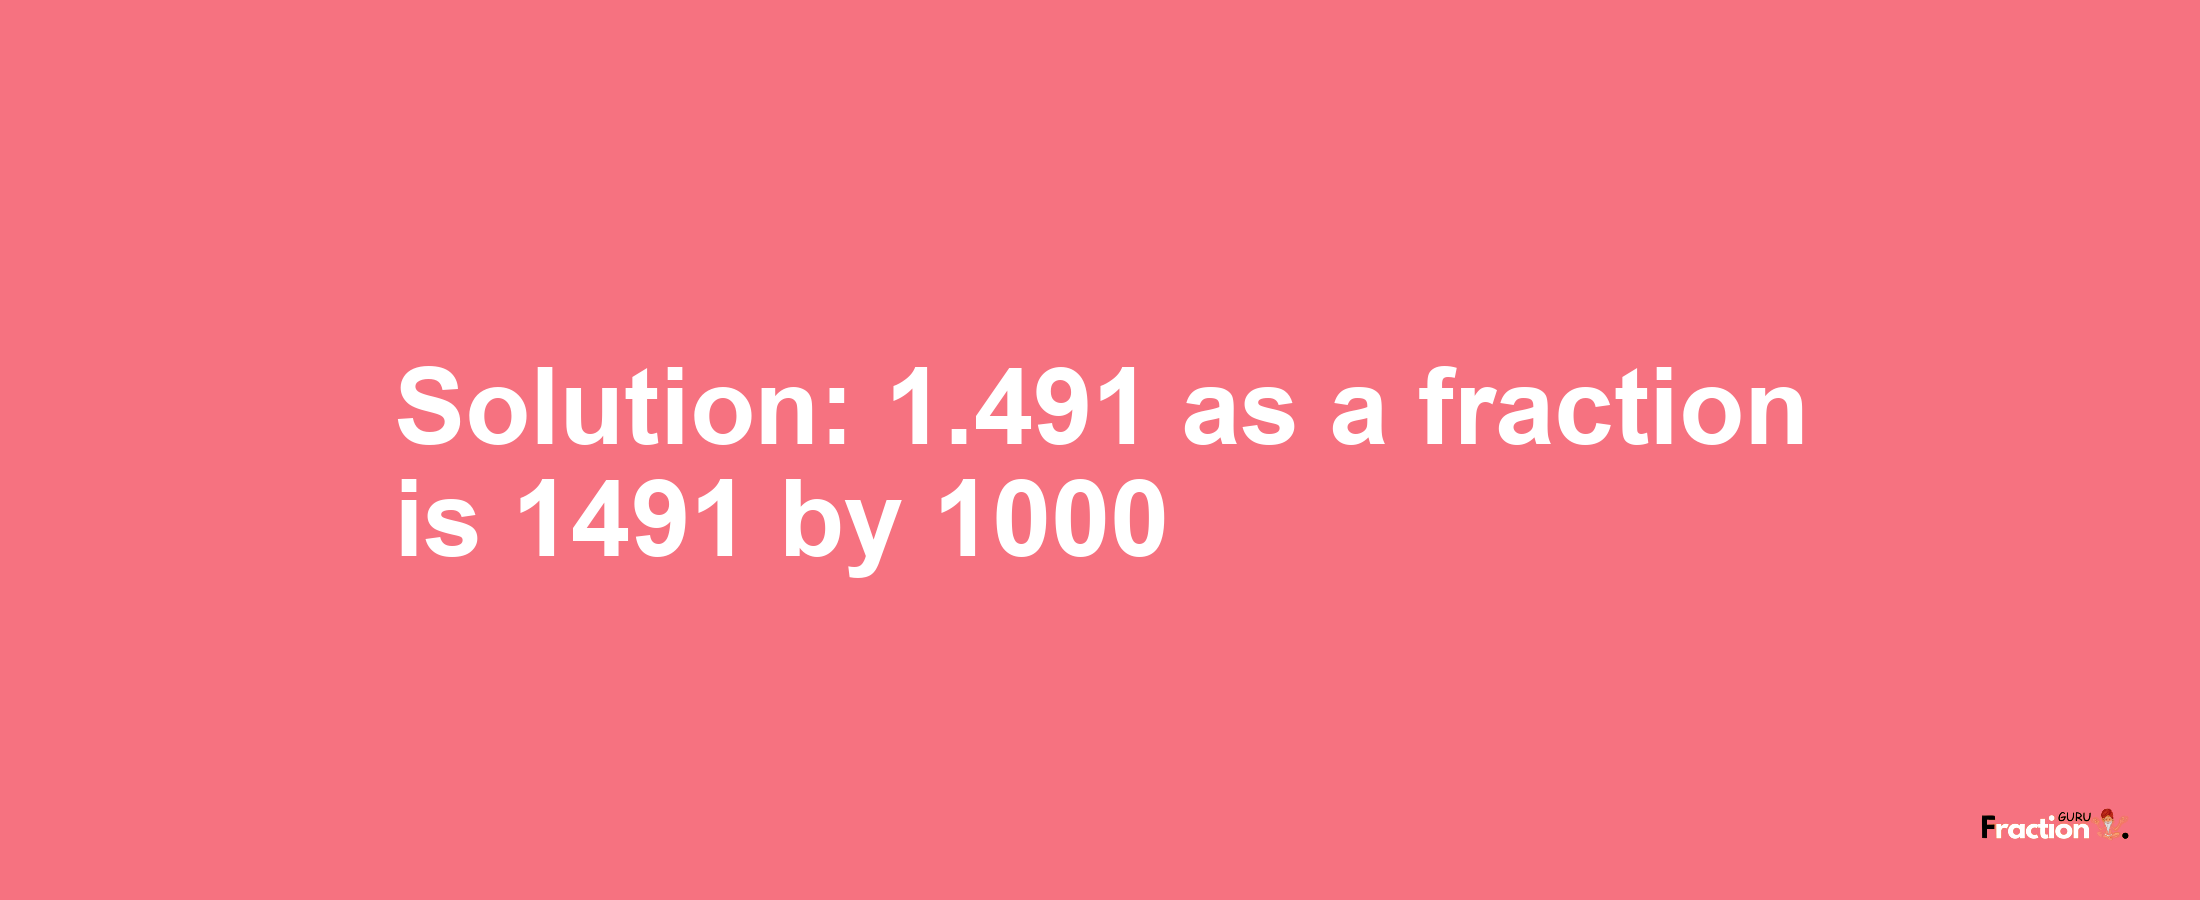 Solution:1.491 as a fraction is 1491/1000